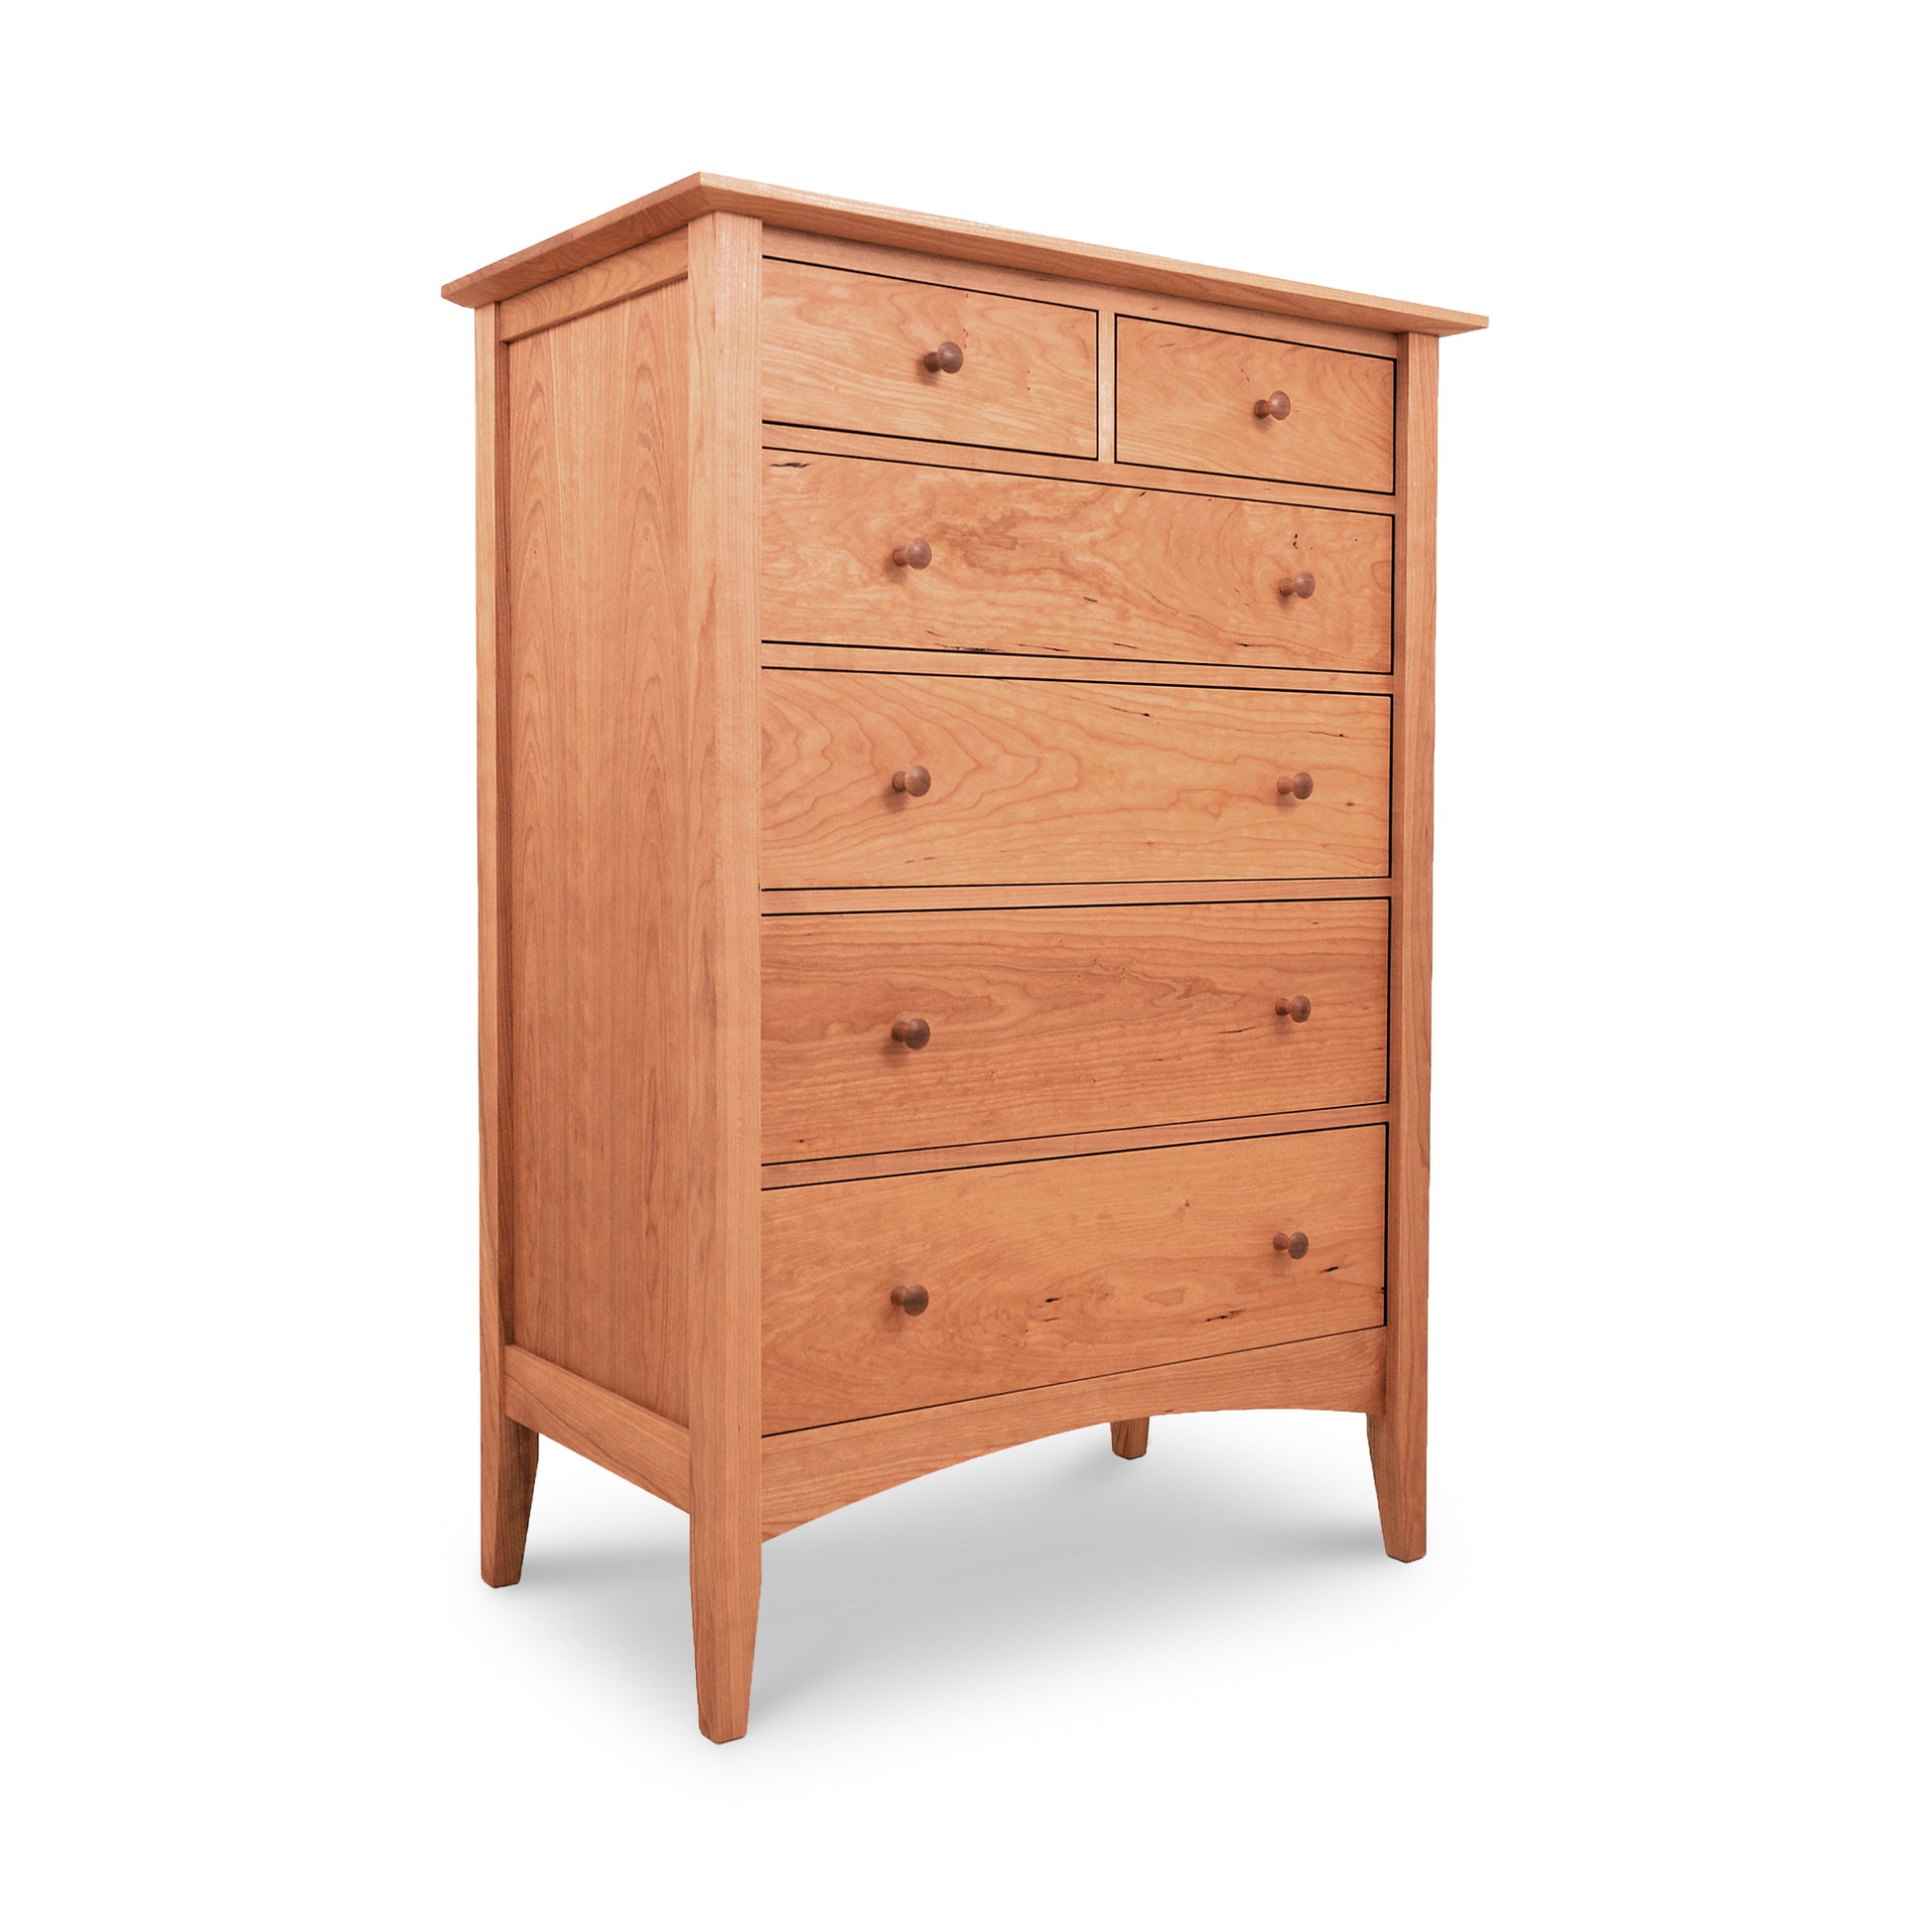 A sustainably-harvested American Shaker 6-Drawer Chest by Maple Corner Woodworks on a white background.